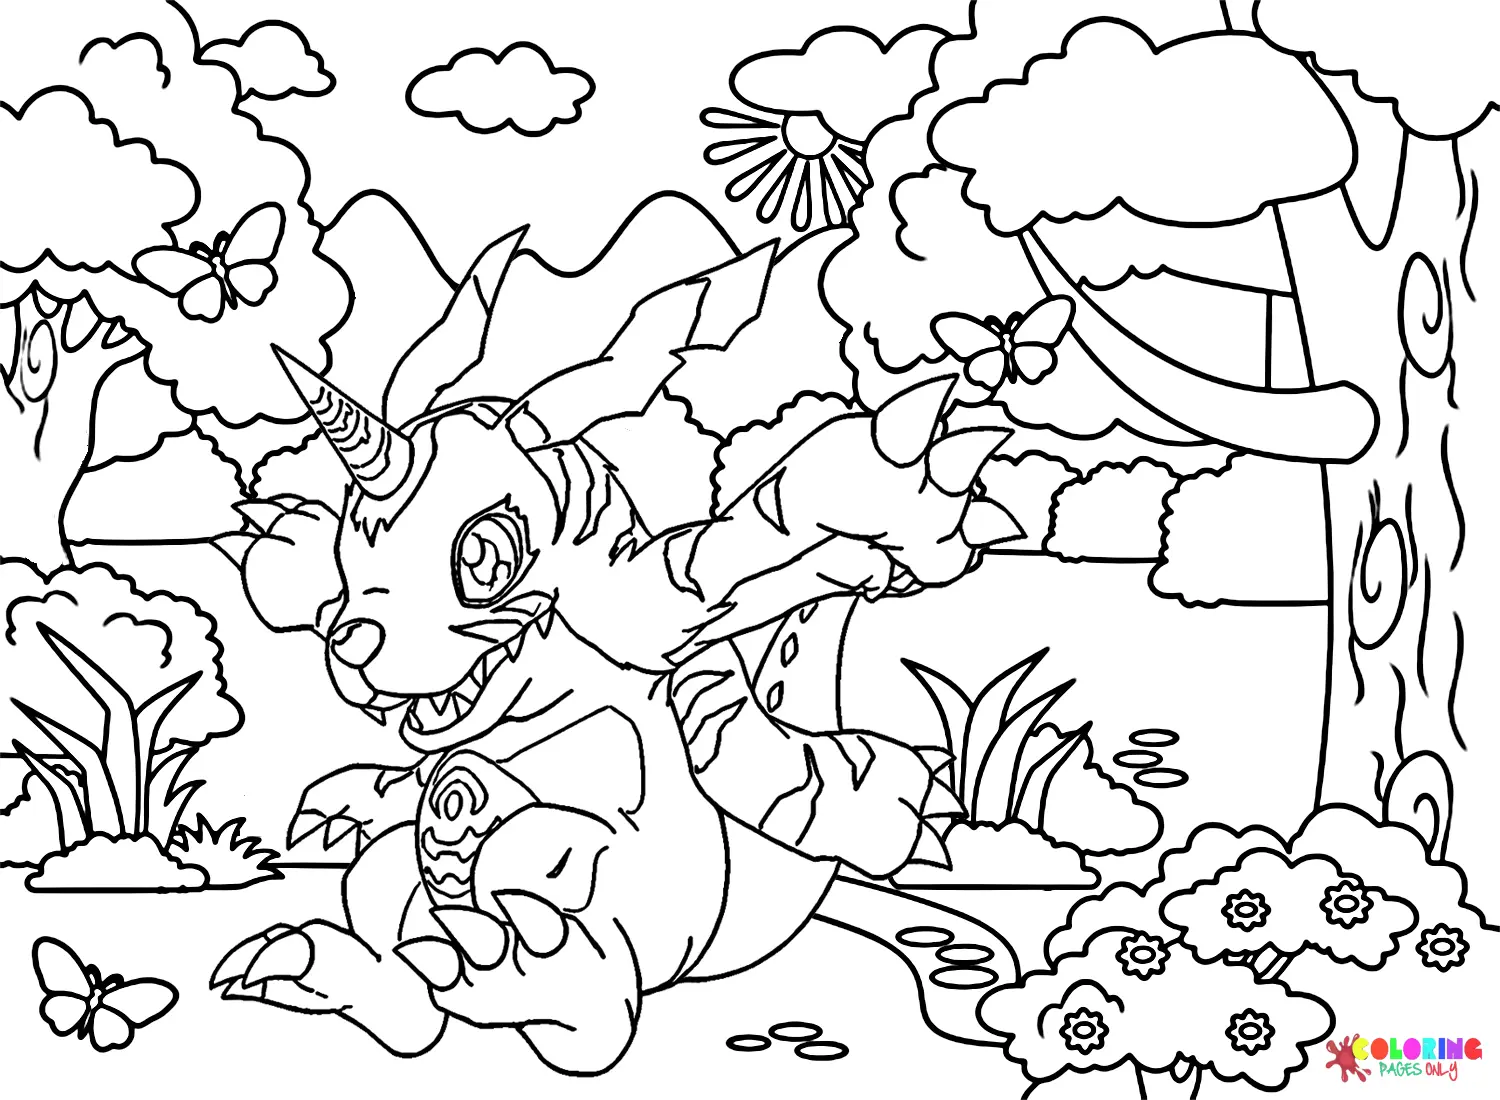 Gabumon Coloring Pages